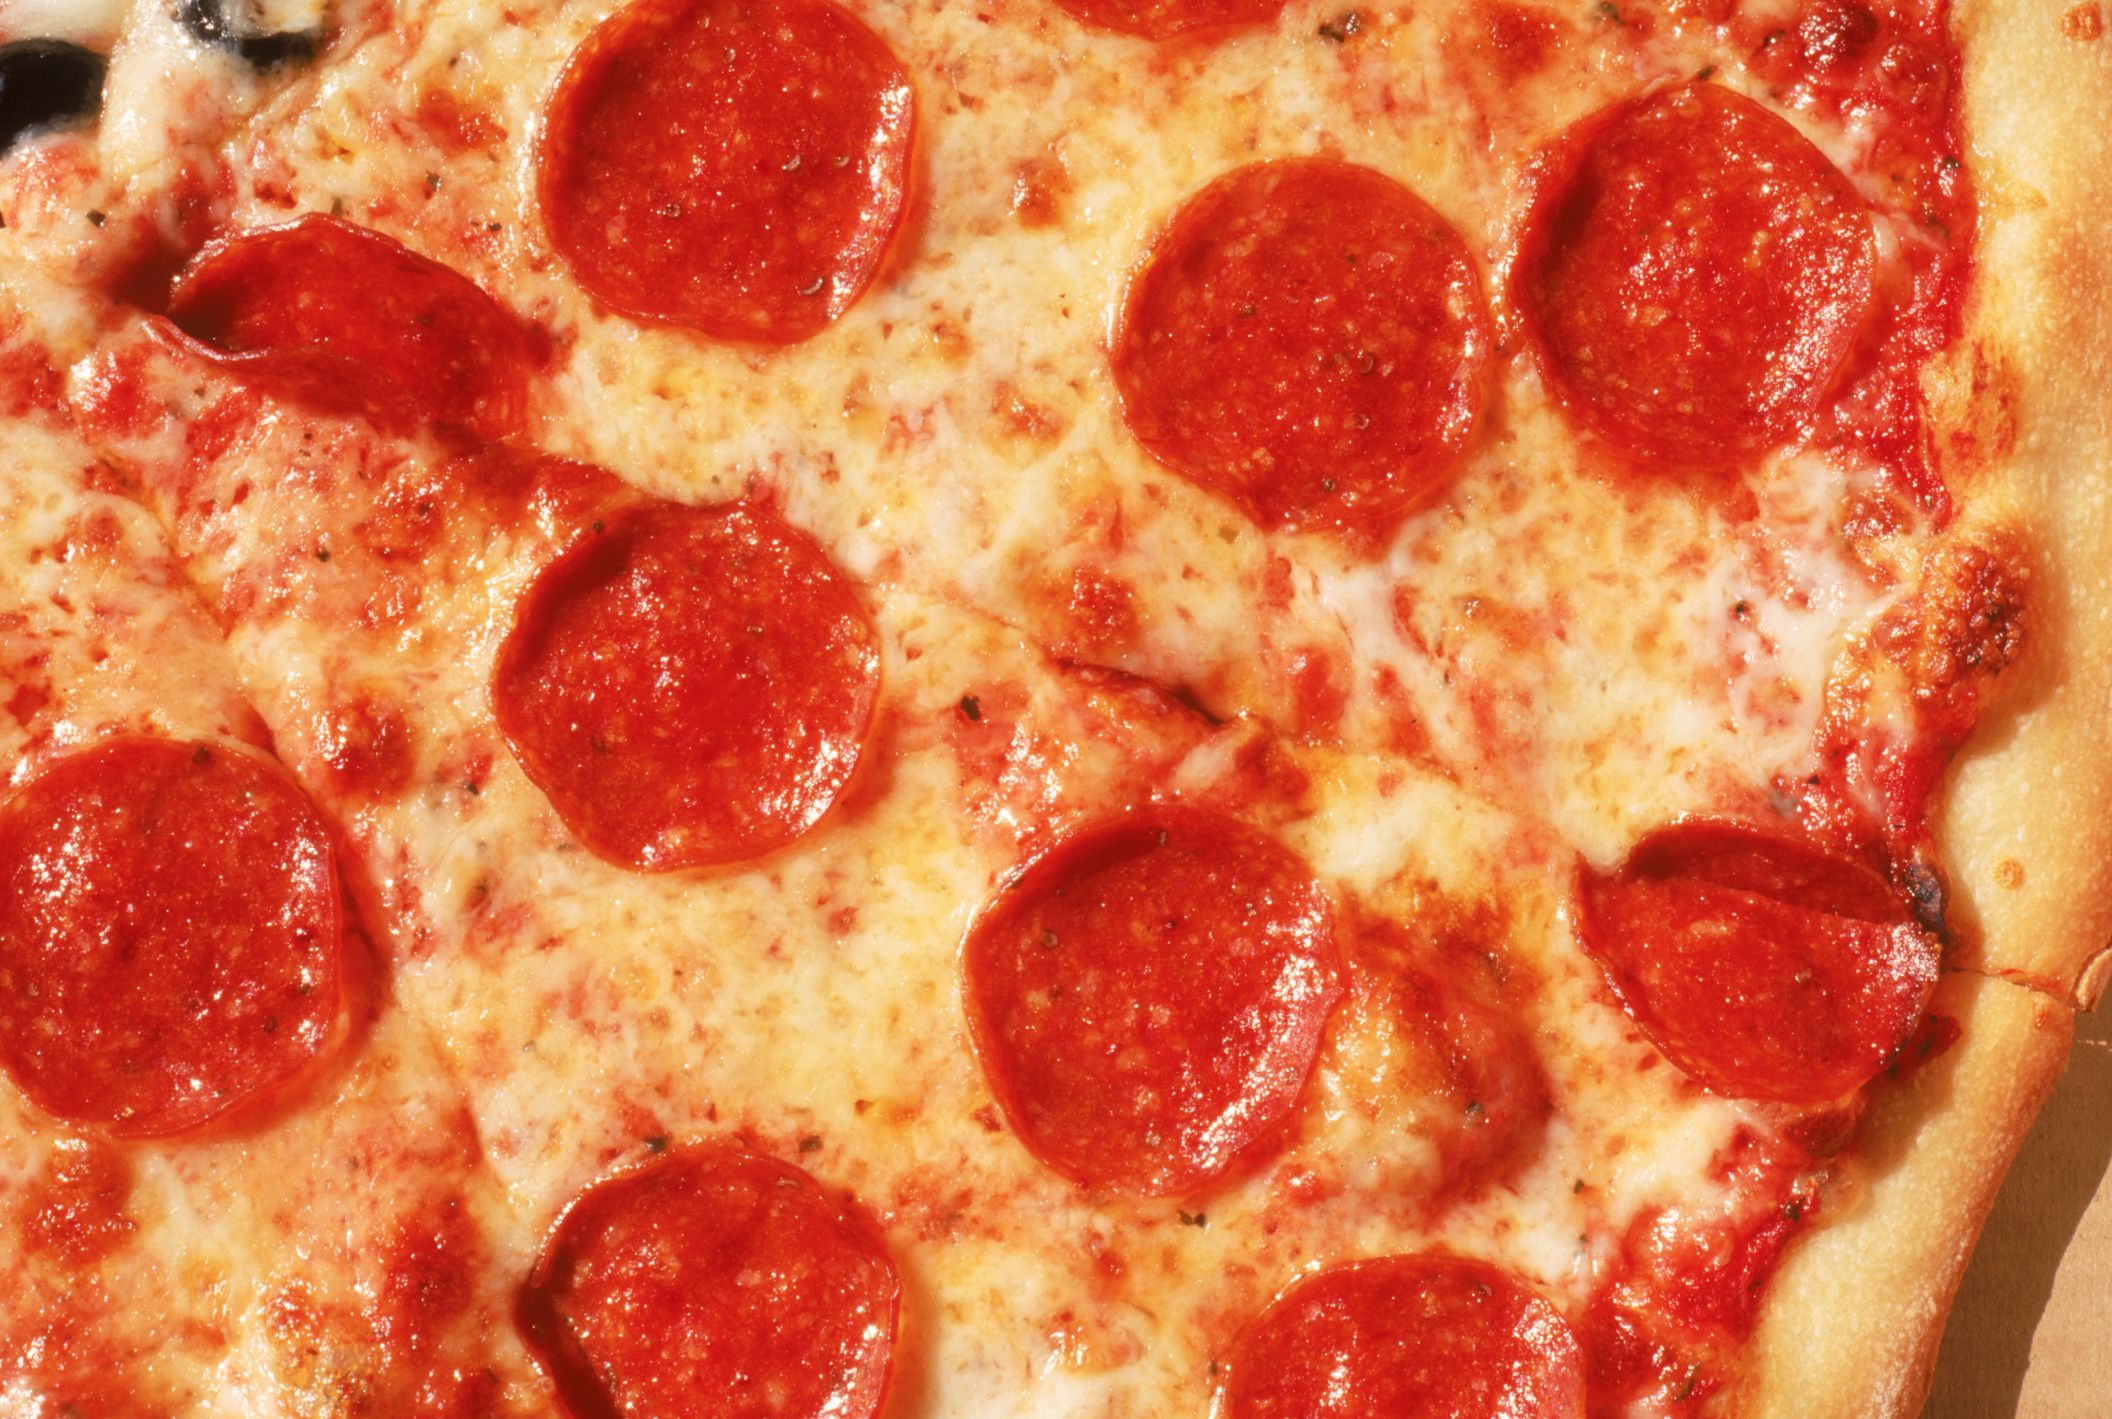 https://hips.hearstapps.com/hmg-prod/images/close-up-of-pepperoni-pizza-royalty-free-image-1634671596.jpg